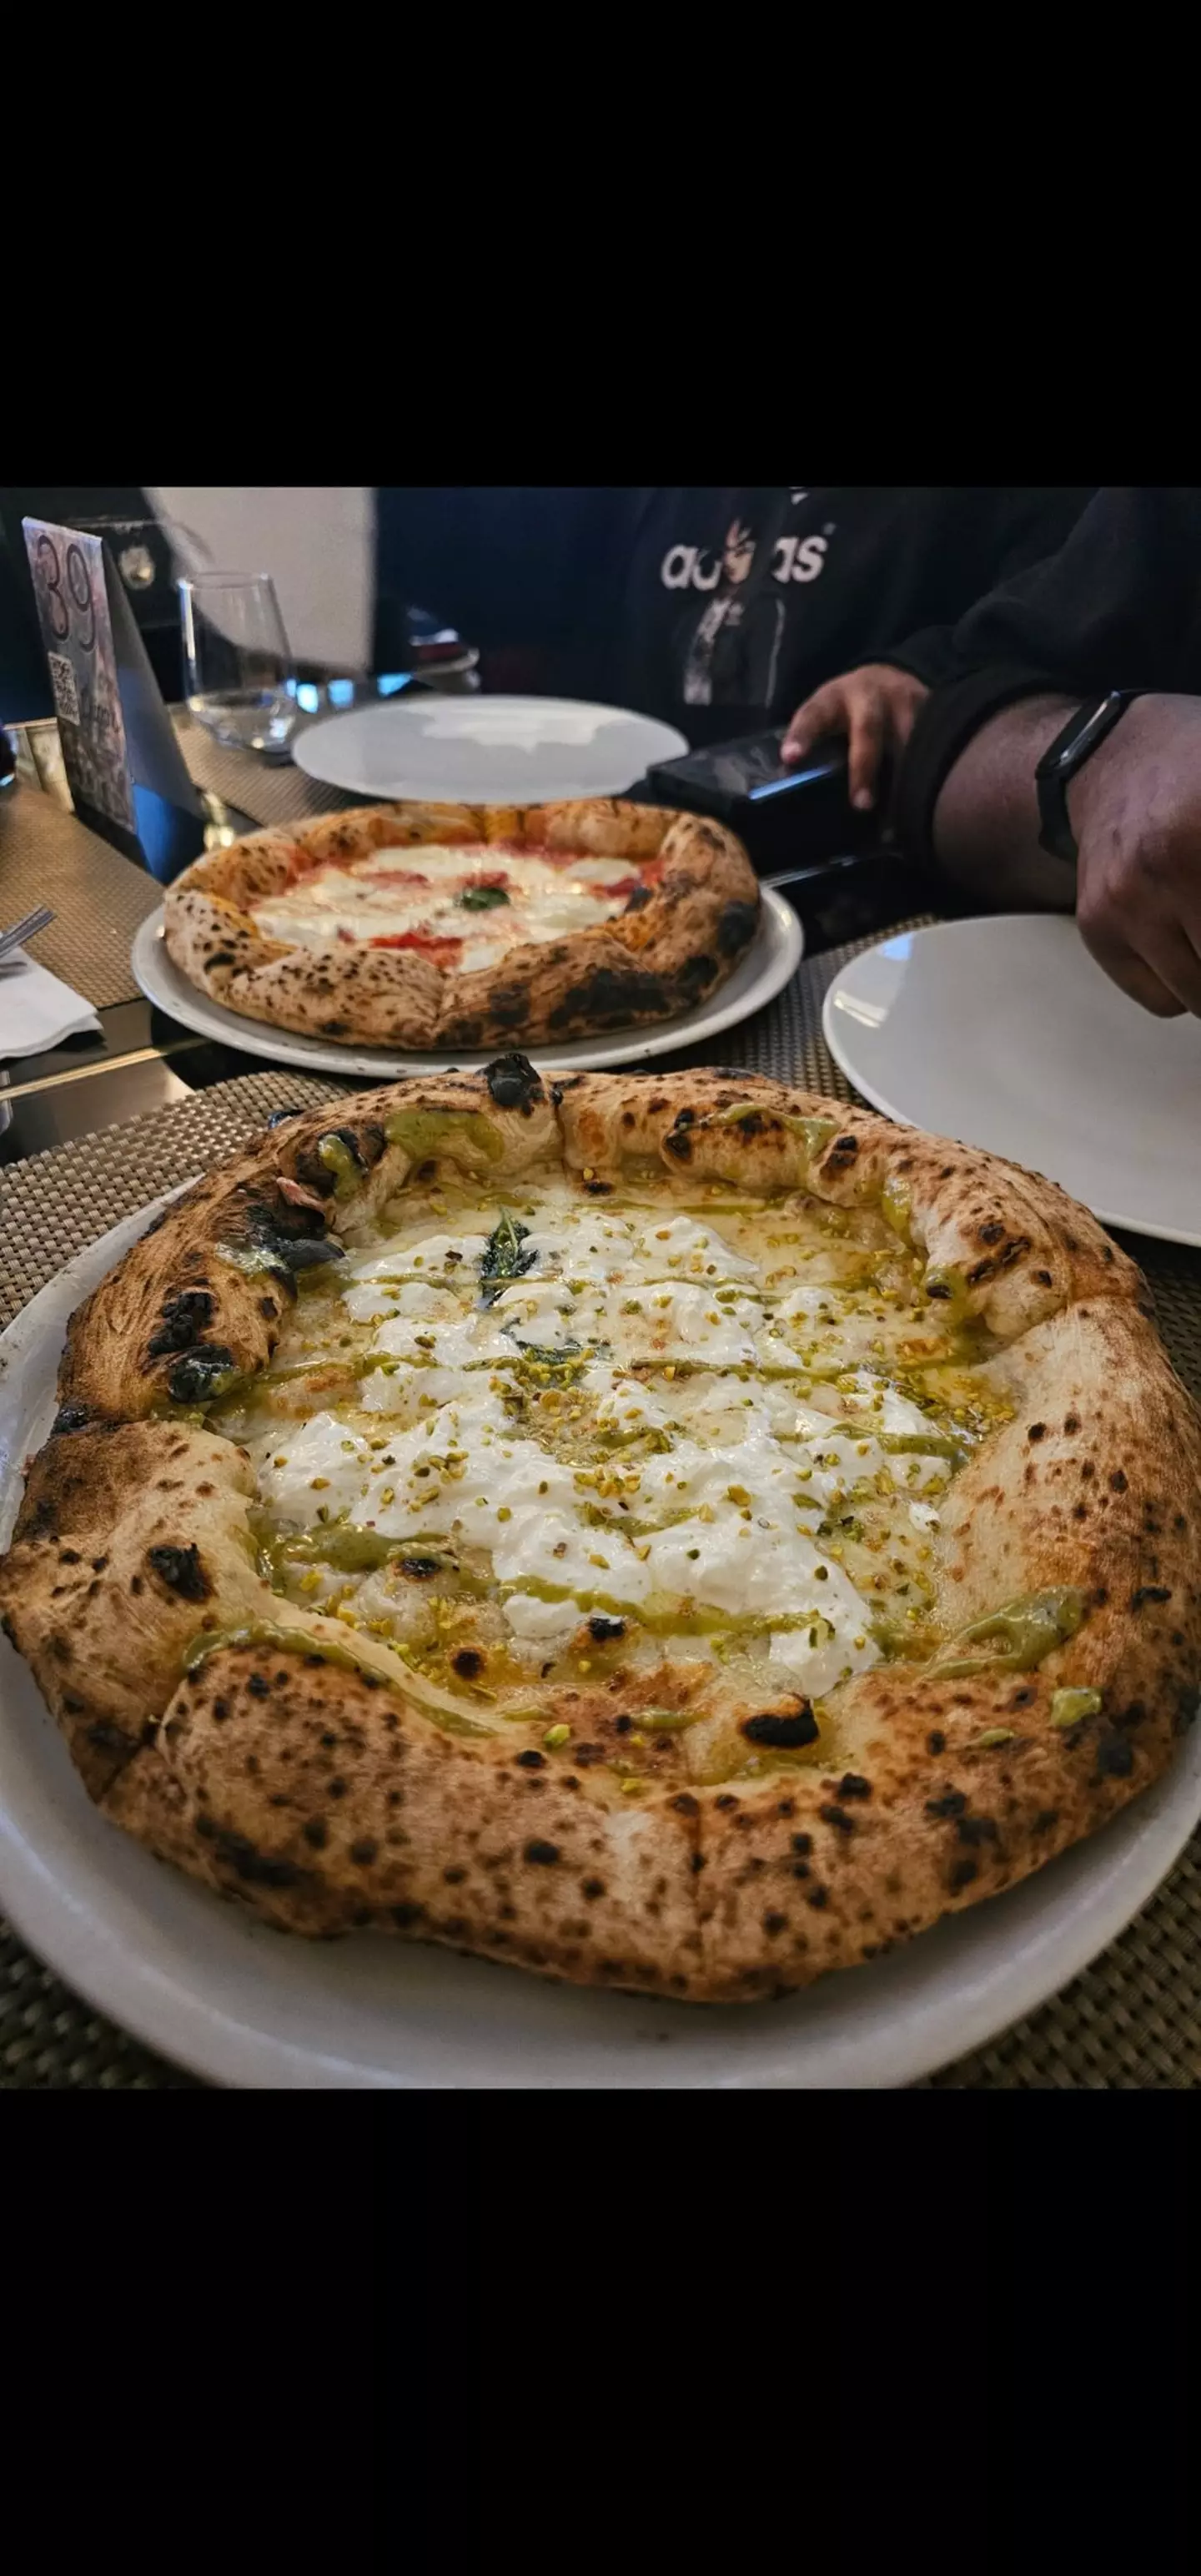 As if it couldn't get even better - pistachio pizza was added to the mix.